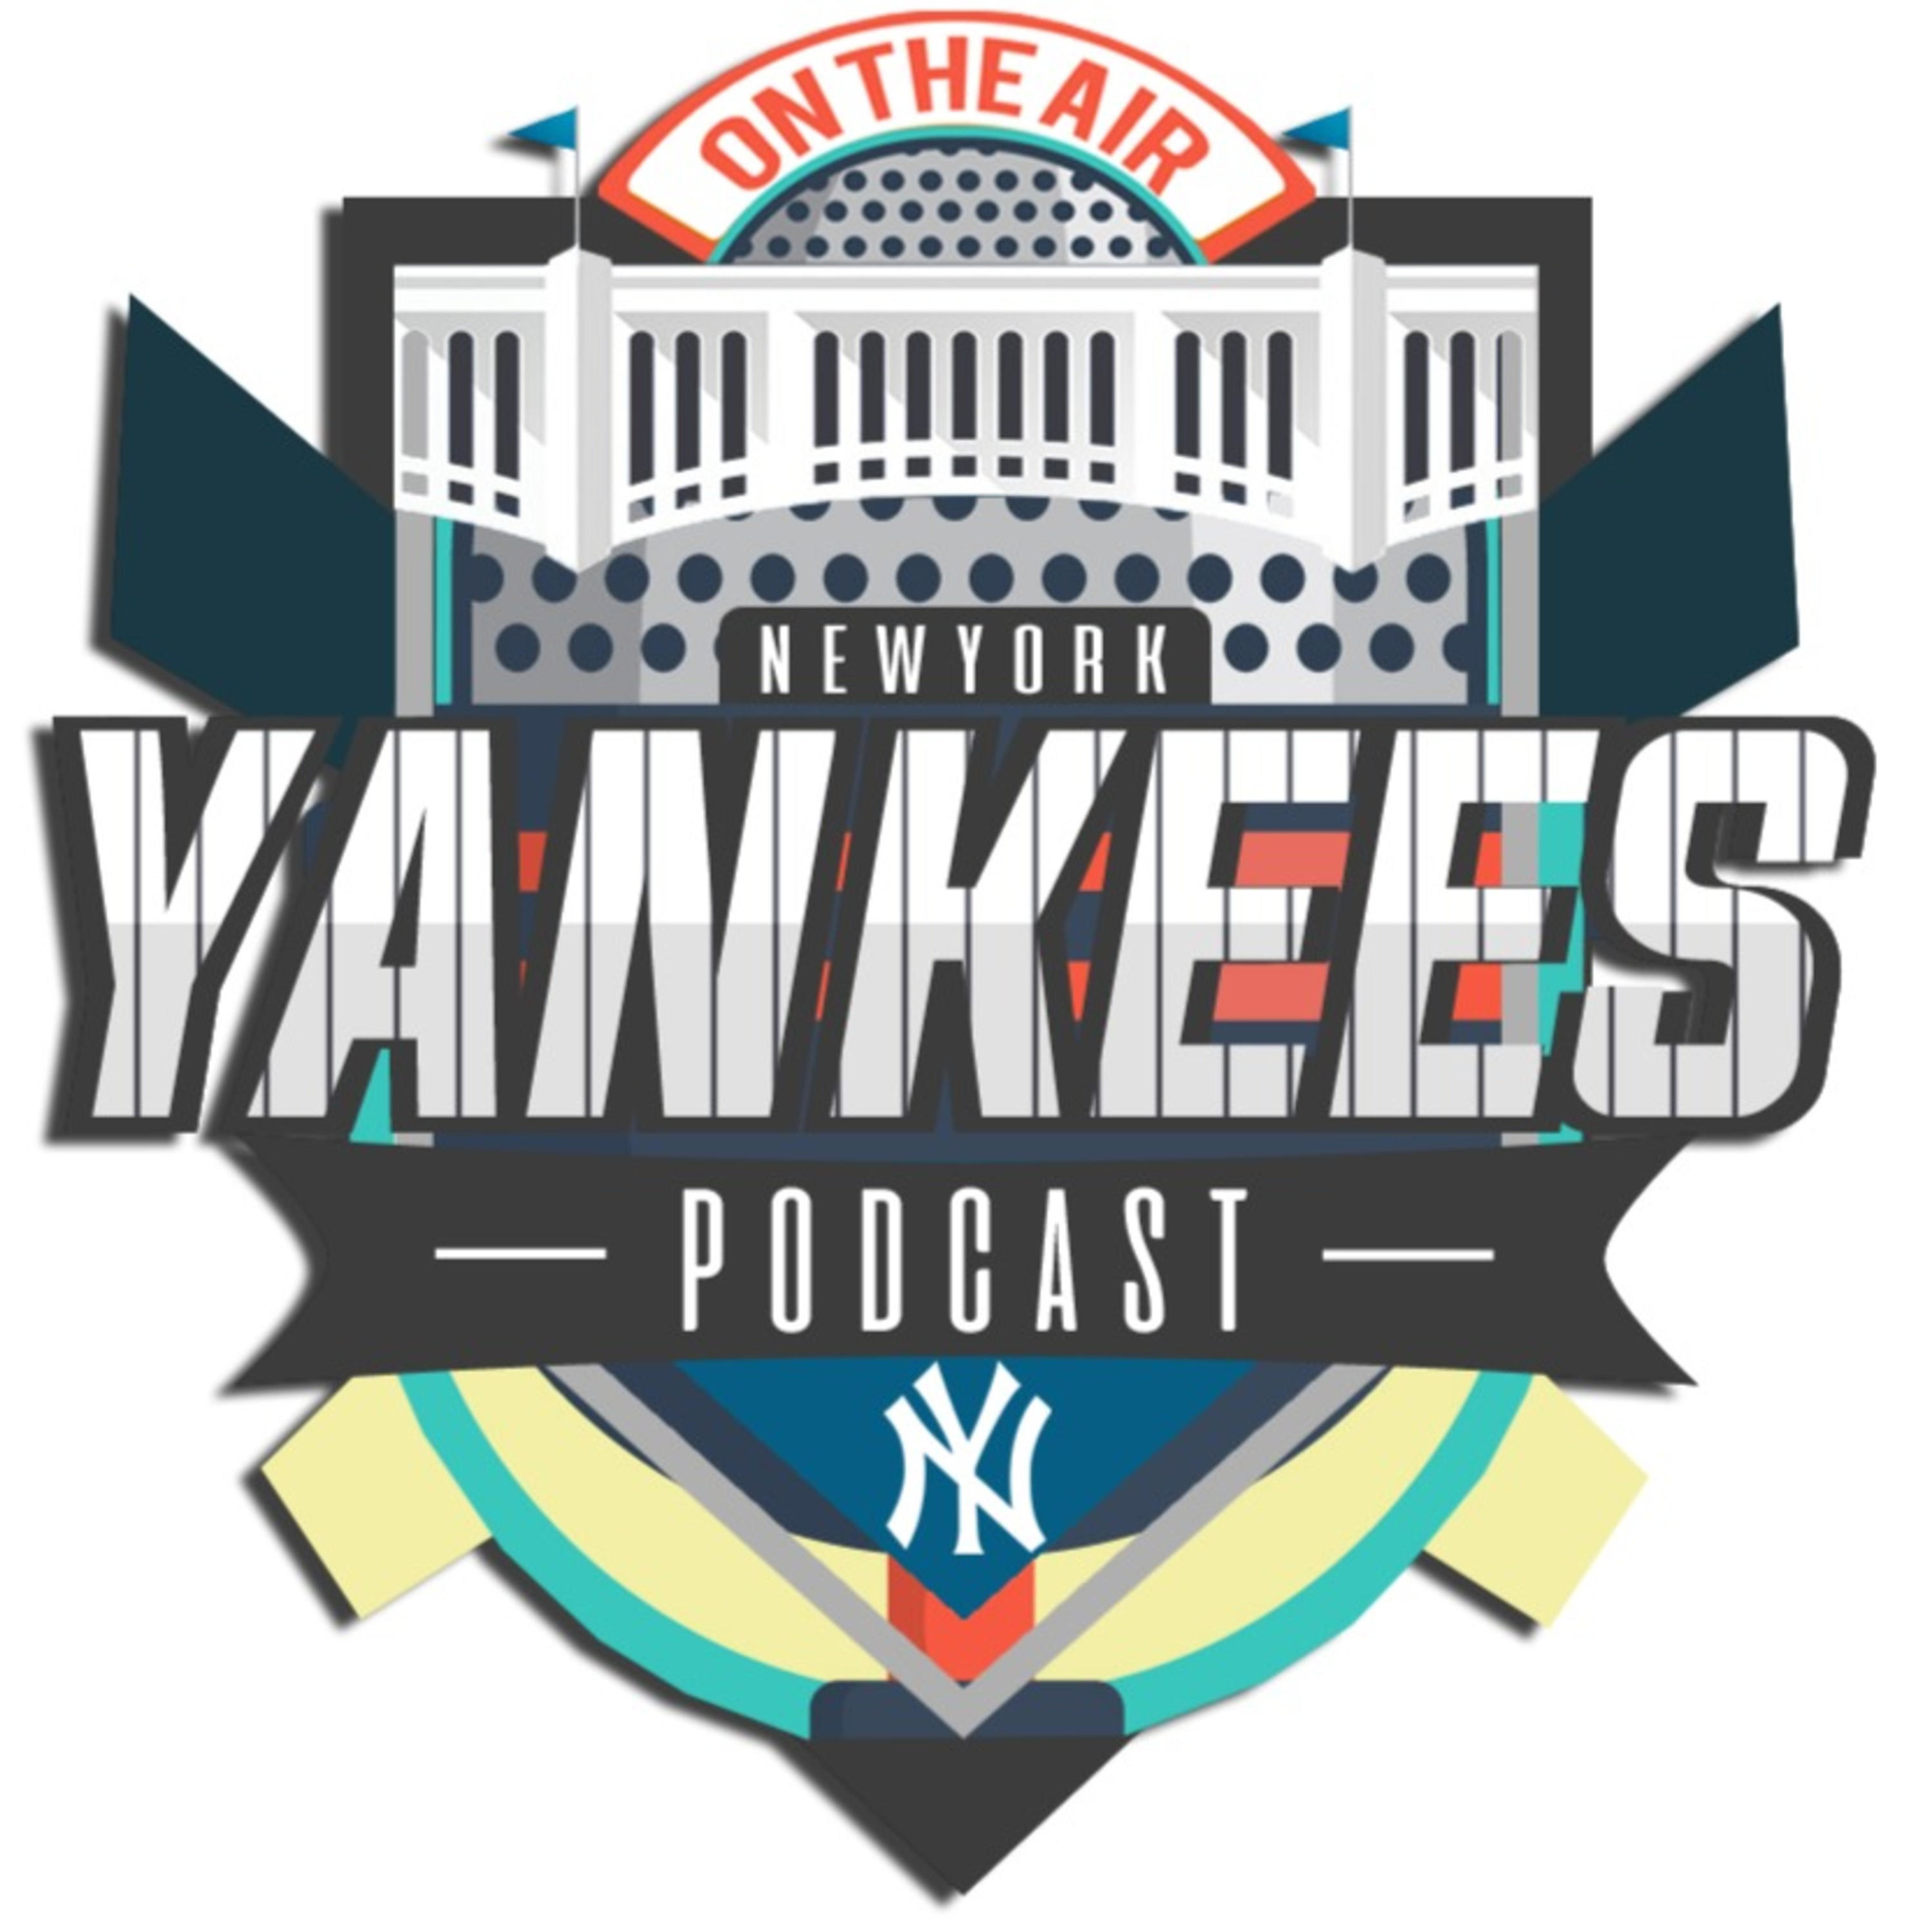 New York Yankees Hungary Podcast - Bé x DS! x Mike - S06EP21